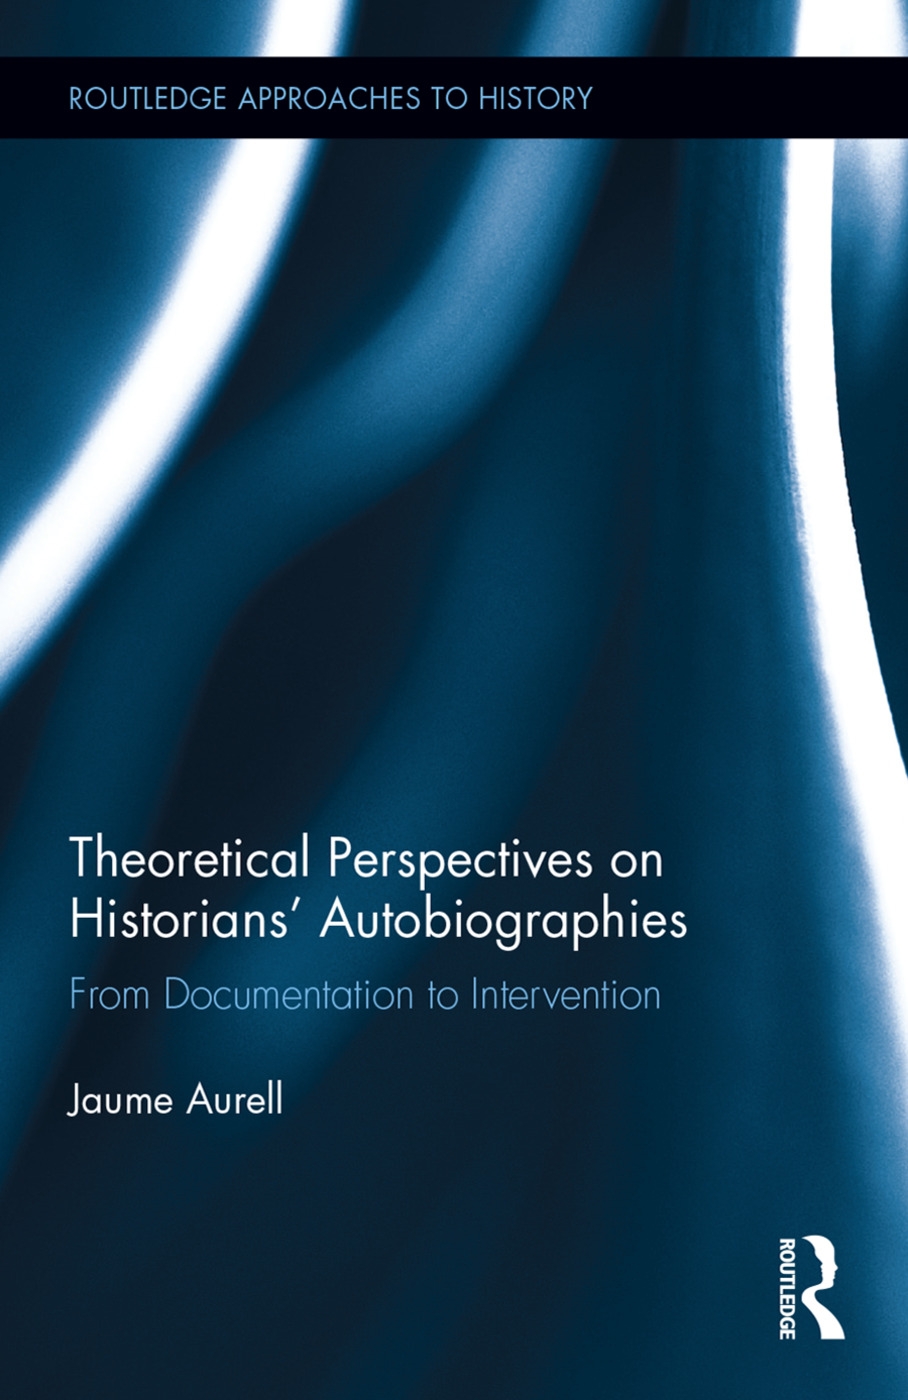 Theoretical Perspectives on Historians’ Autobiographies: From Documentation to Intervention